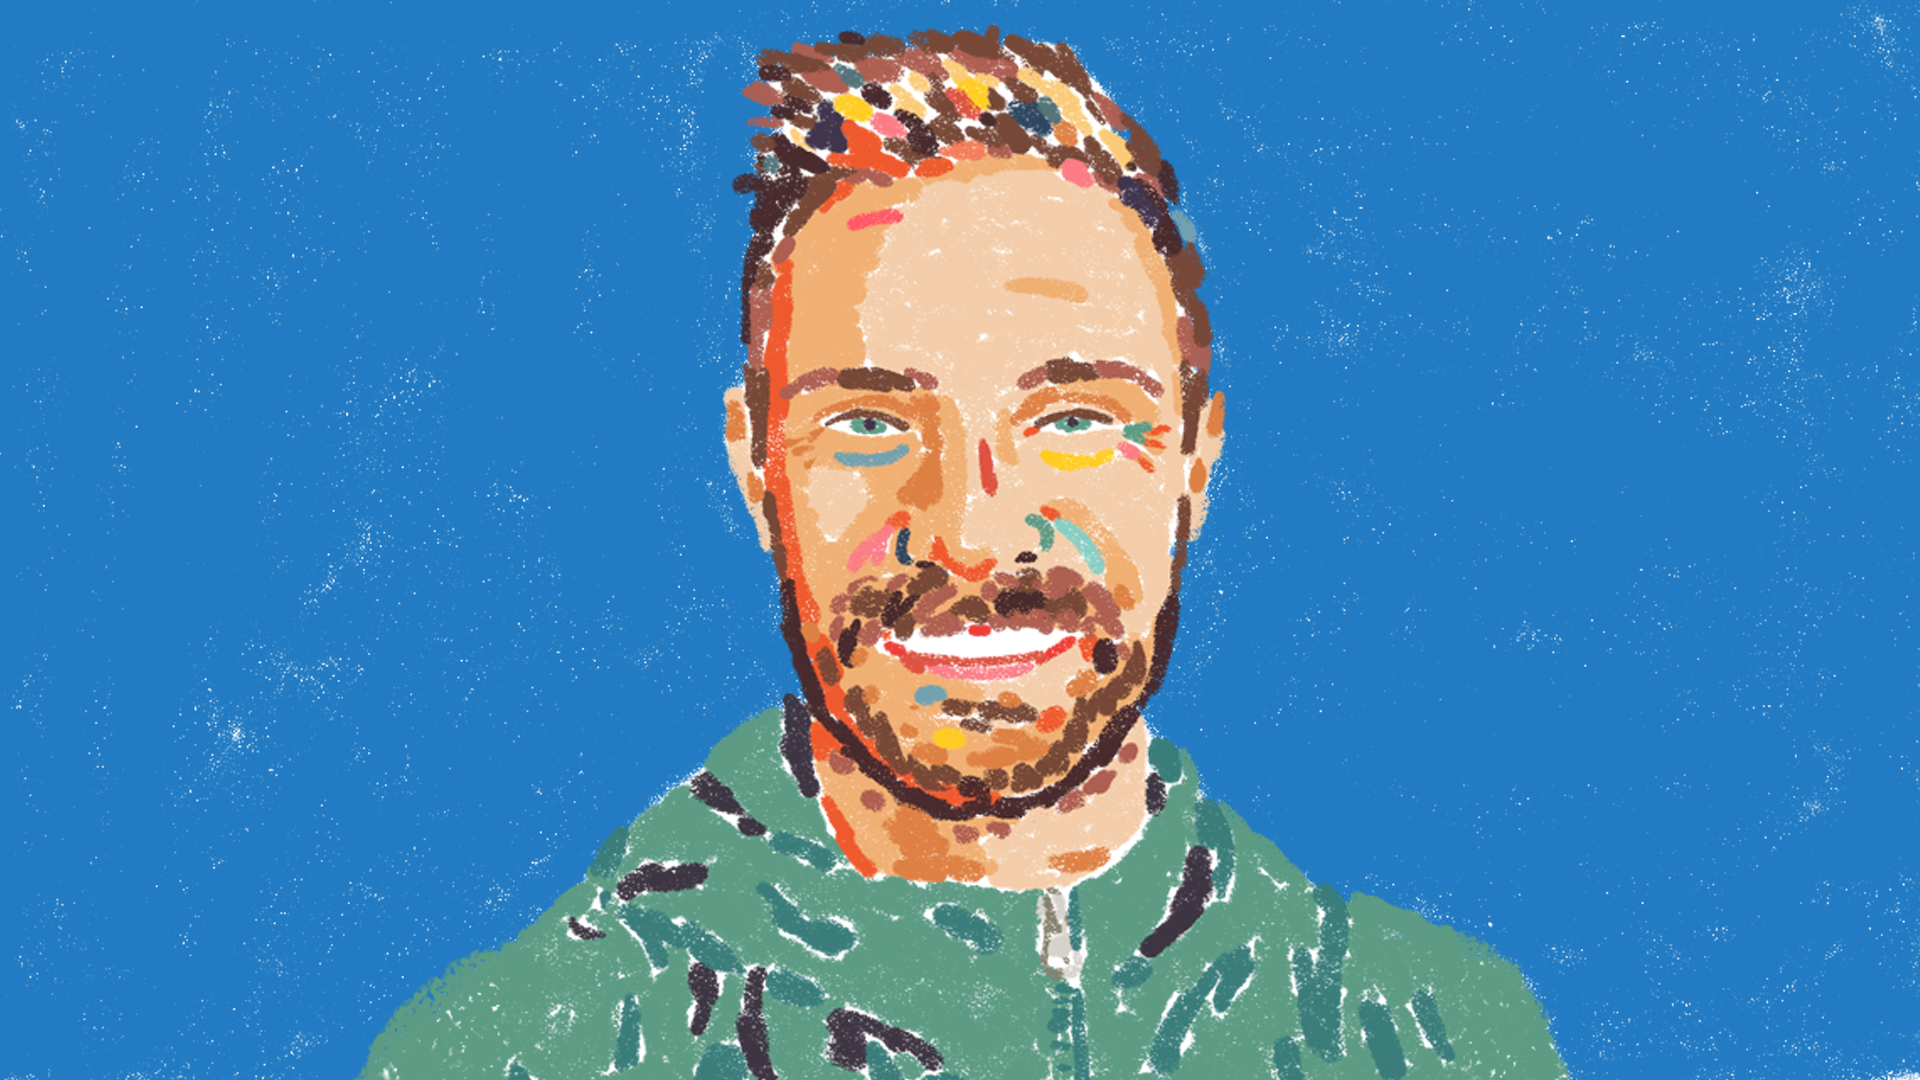 Illustration of male with blonde hair wearing a green sweater over a blue background.